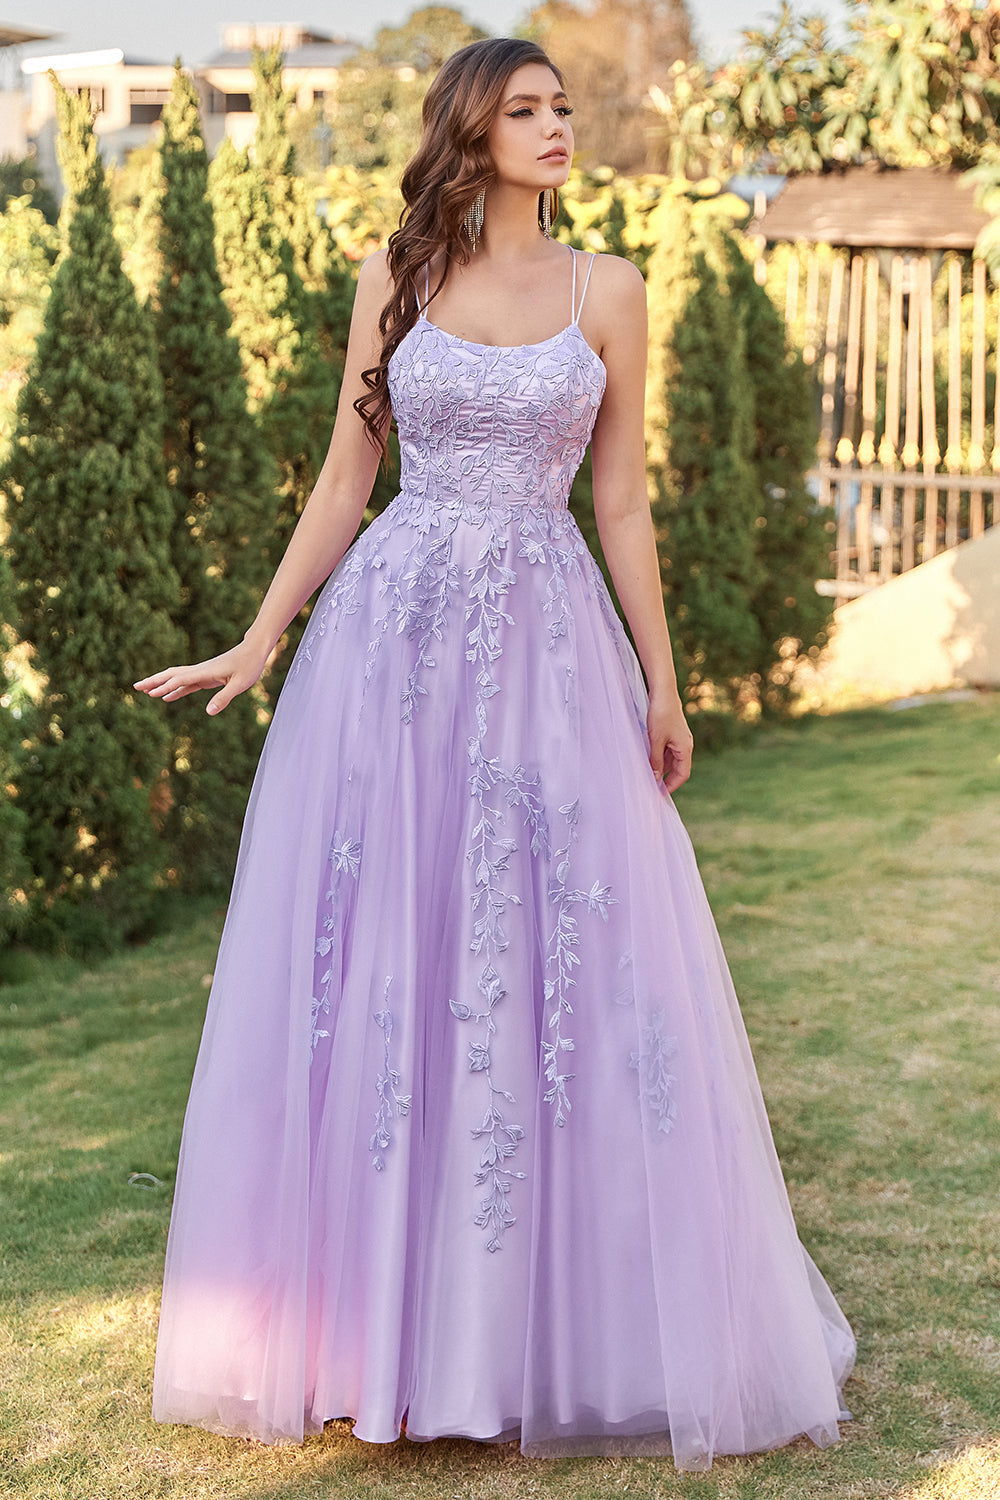 Purple Tulle Ball Dress with Appliques